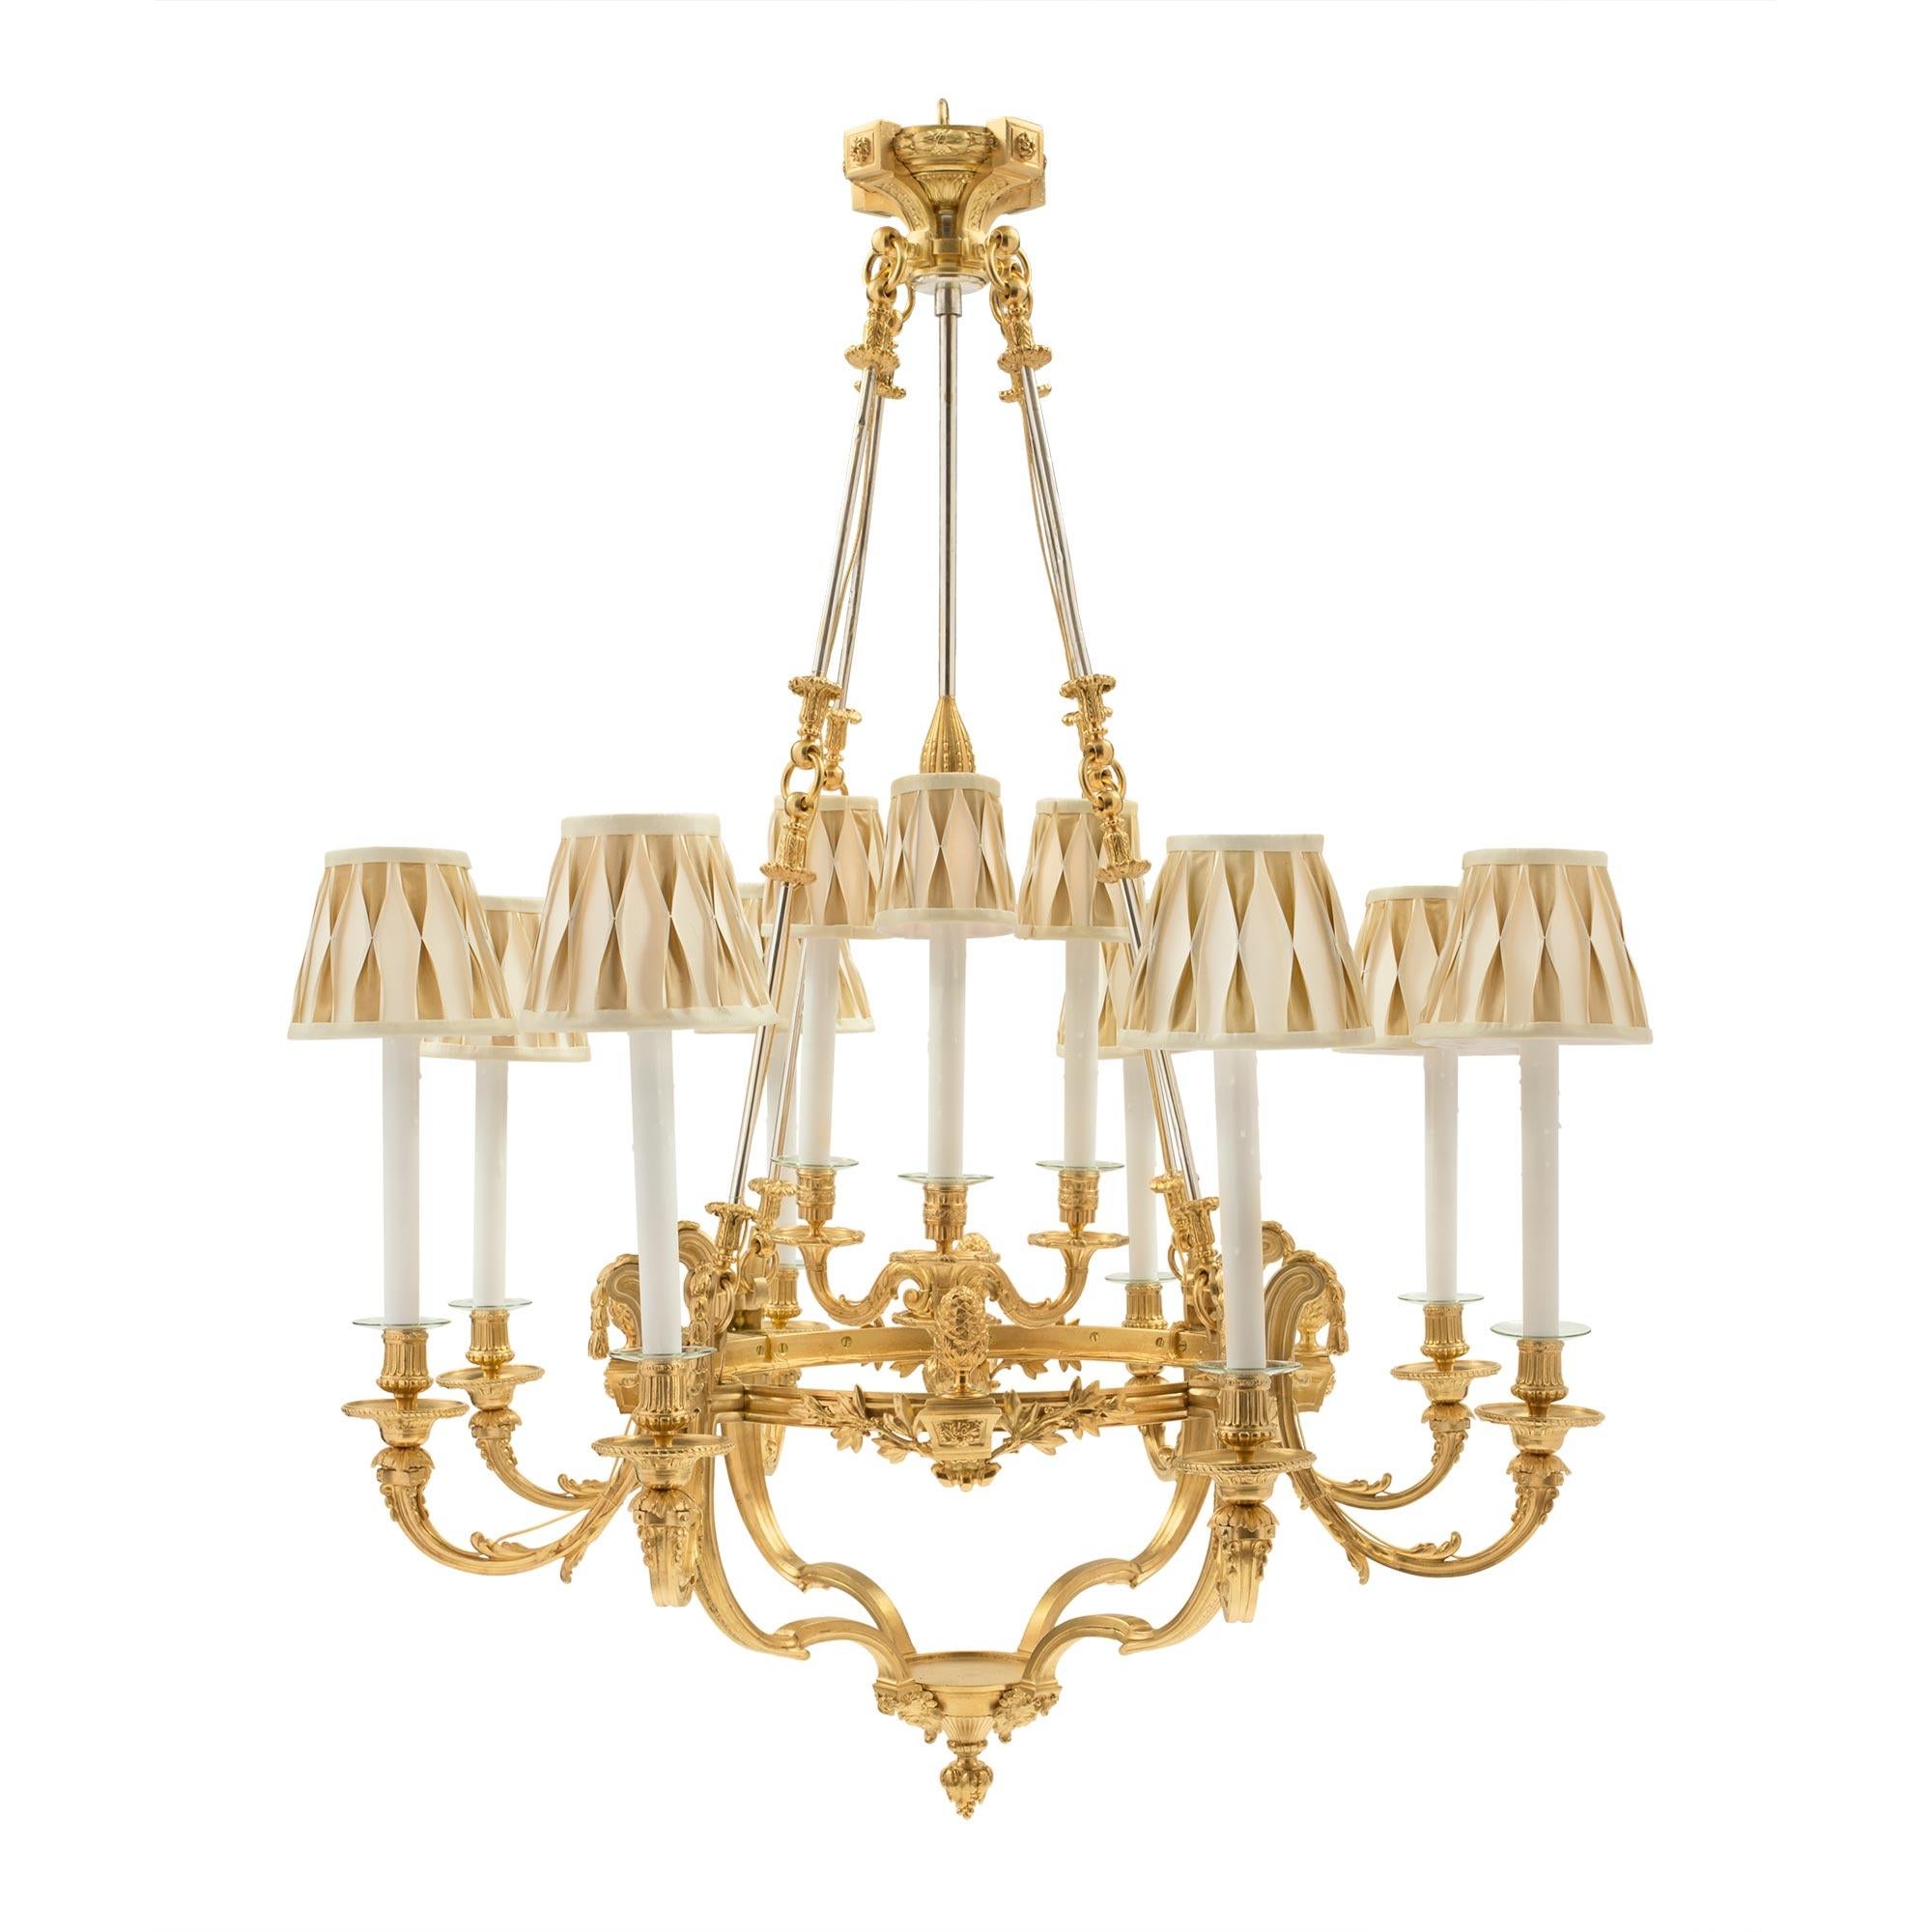 An elegant and high quality French 19th century Louis XVI st. ormolu and silvered bronze eight arm chandelier. The chandelier is centered by a finely chased bottom acorn finial joined by four 'S' scrolled arms. Below the arms are wonderful and